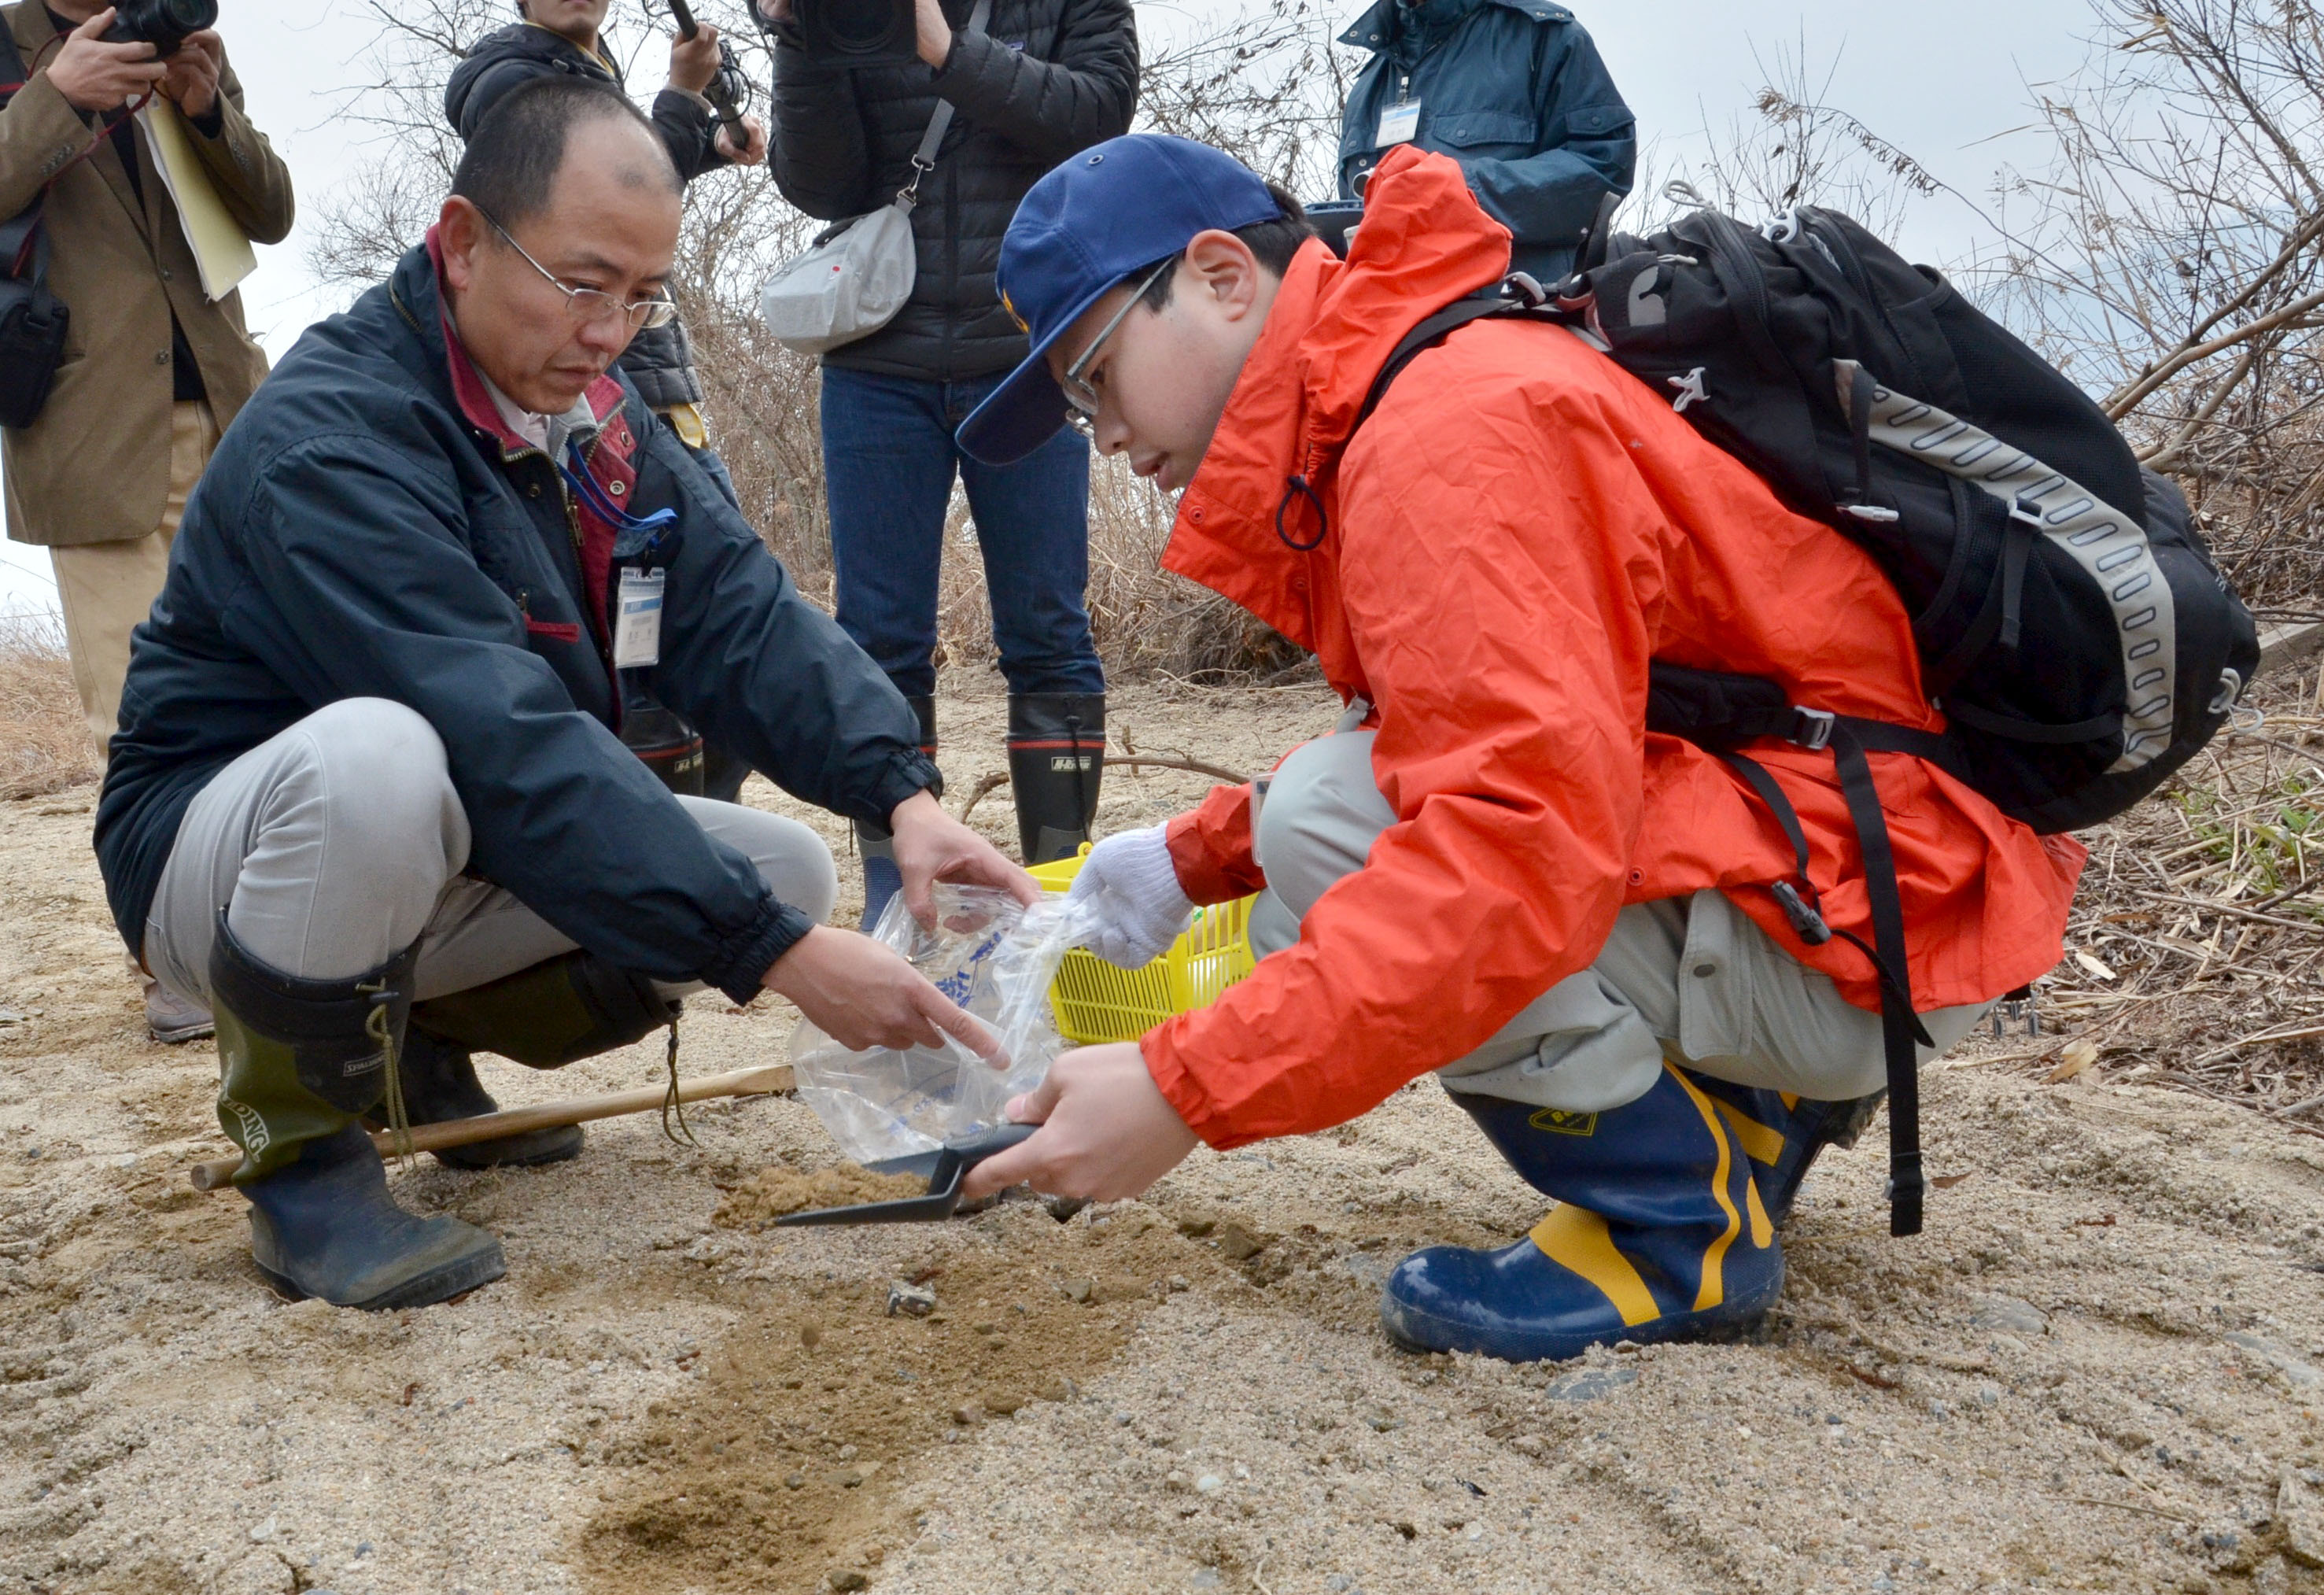 Shiga prefectural officials collect soil samples near a riverbank in Takashima on Feb. 28. Dozens of bags of cesium-contaminated wooden chips were found dumped there last year. | KYODO